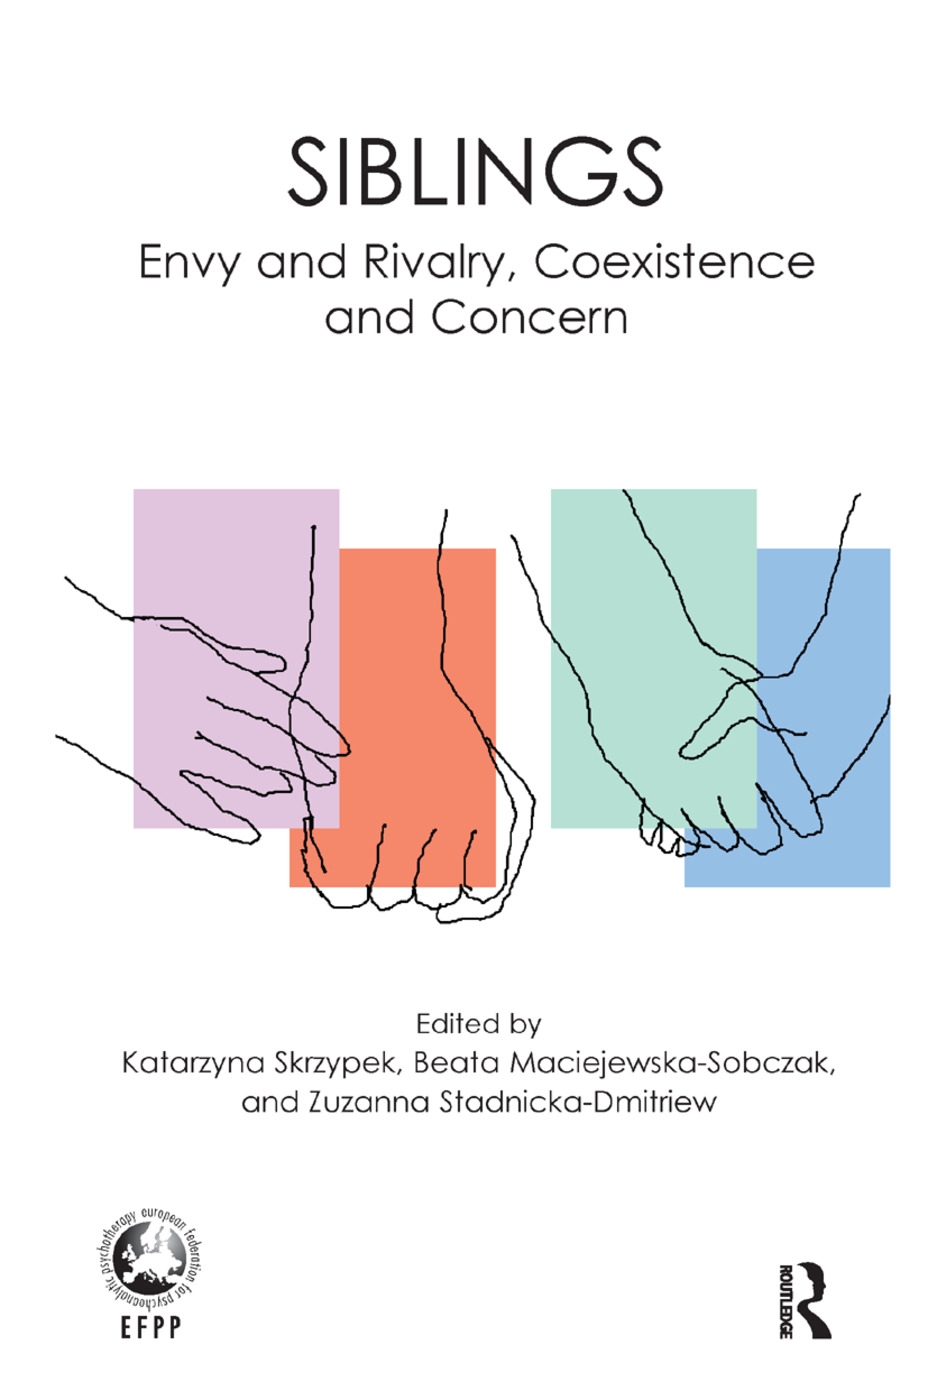 Siblings: Envy and Rivalry, Coexistence and Concern